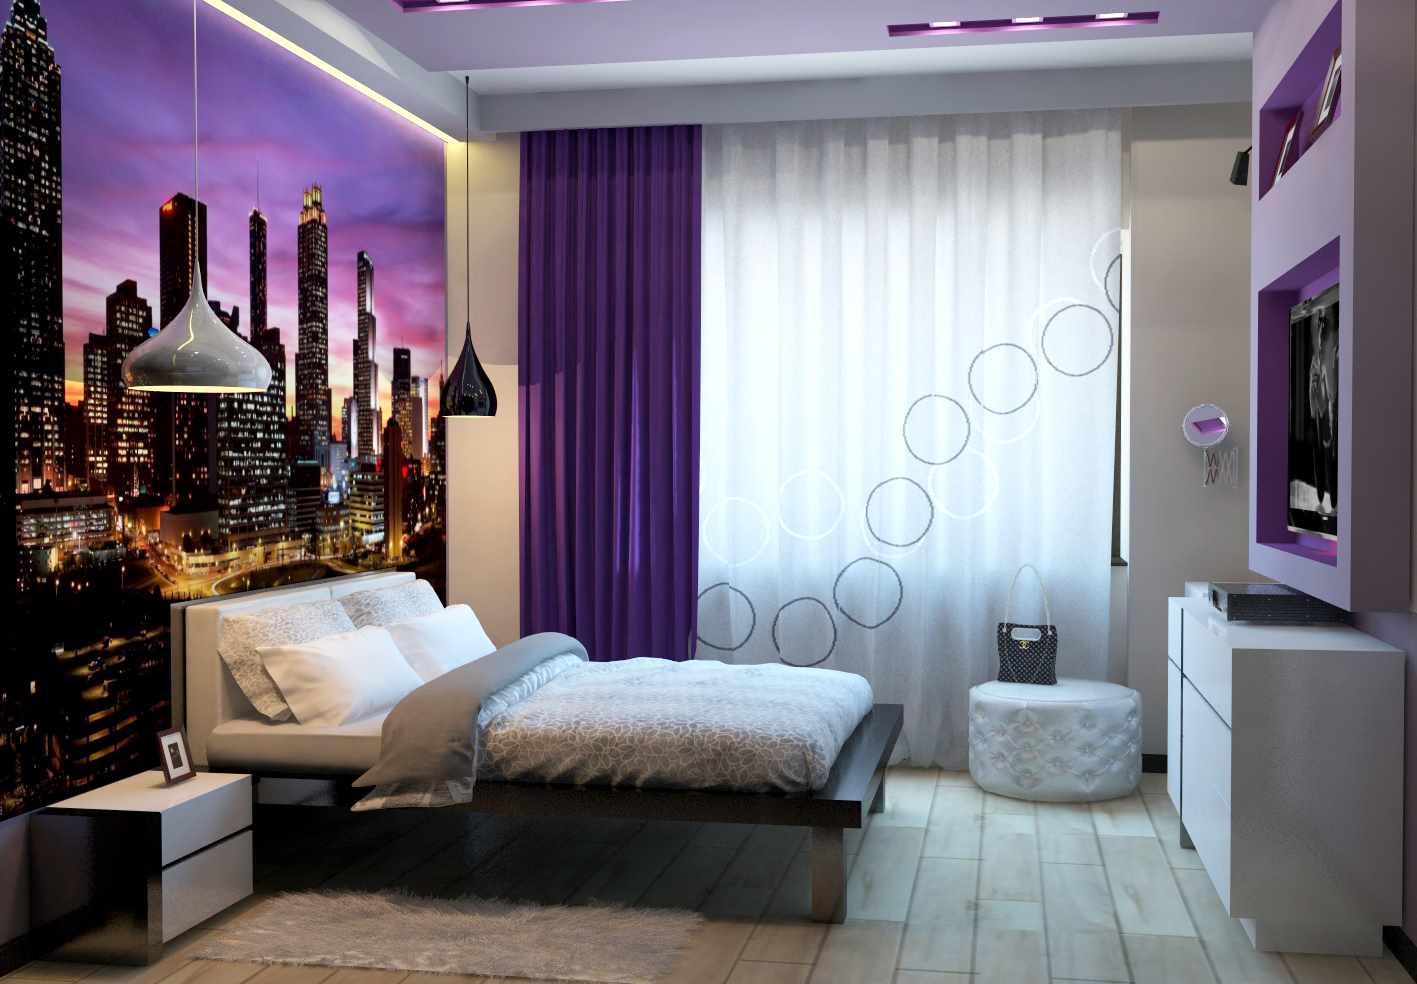 An example of a beautiful bedroom wall decoration